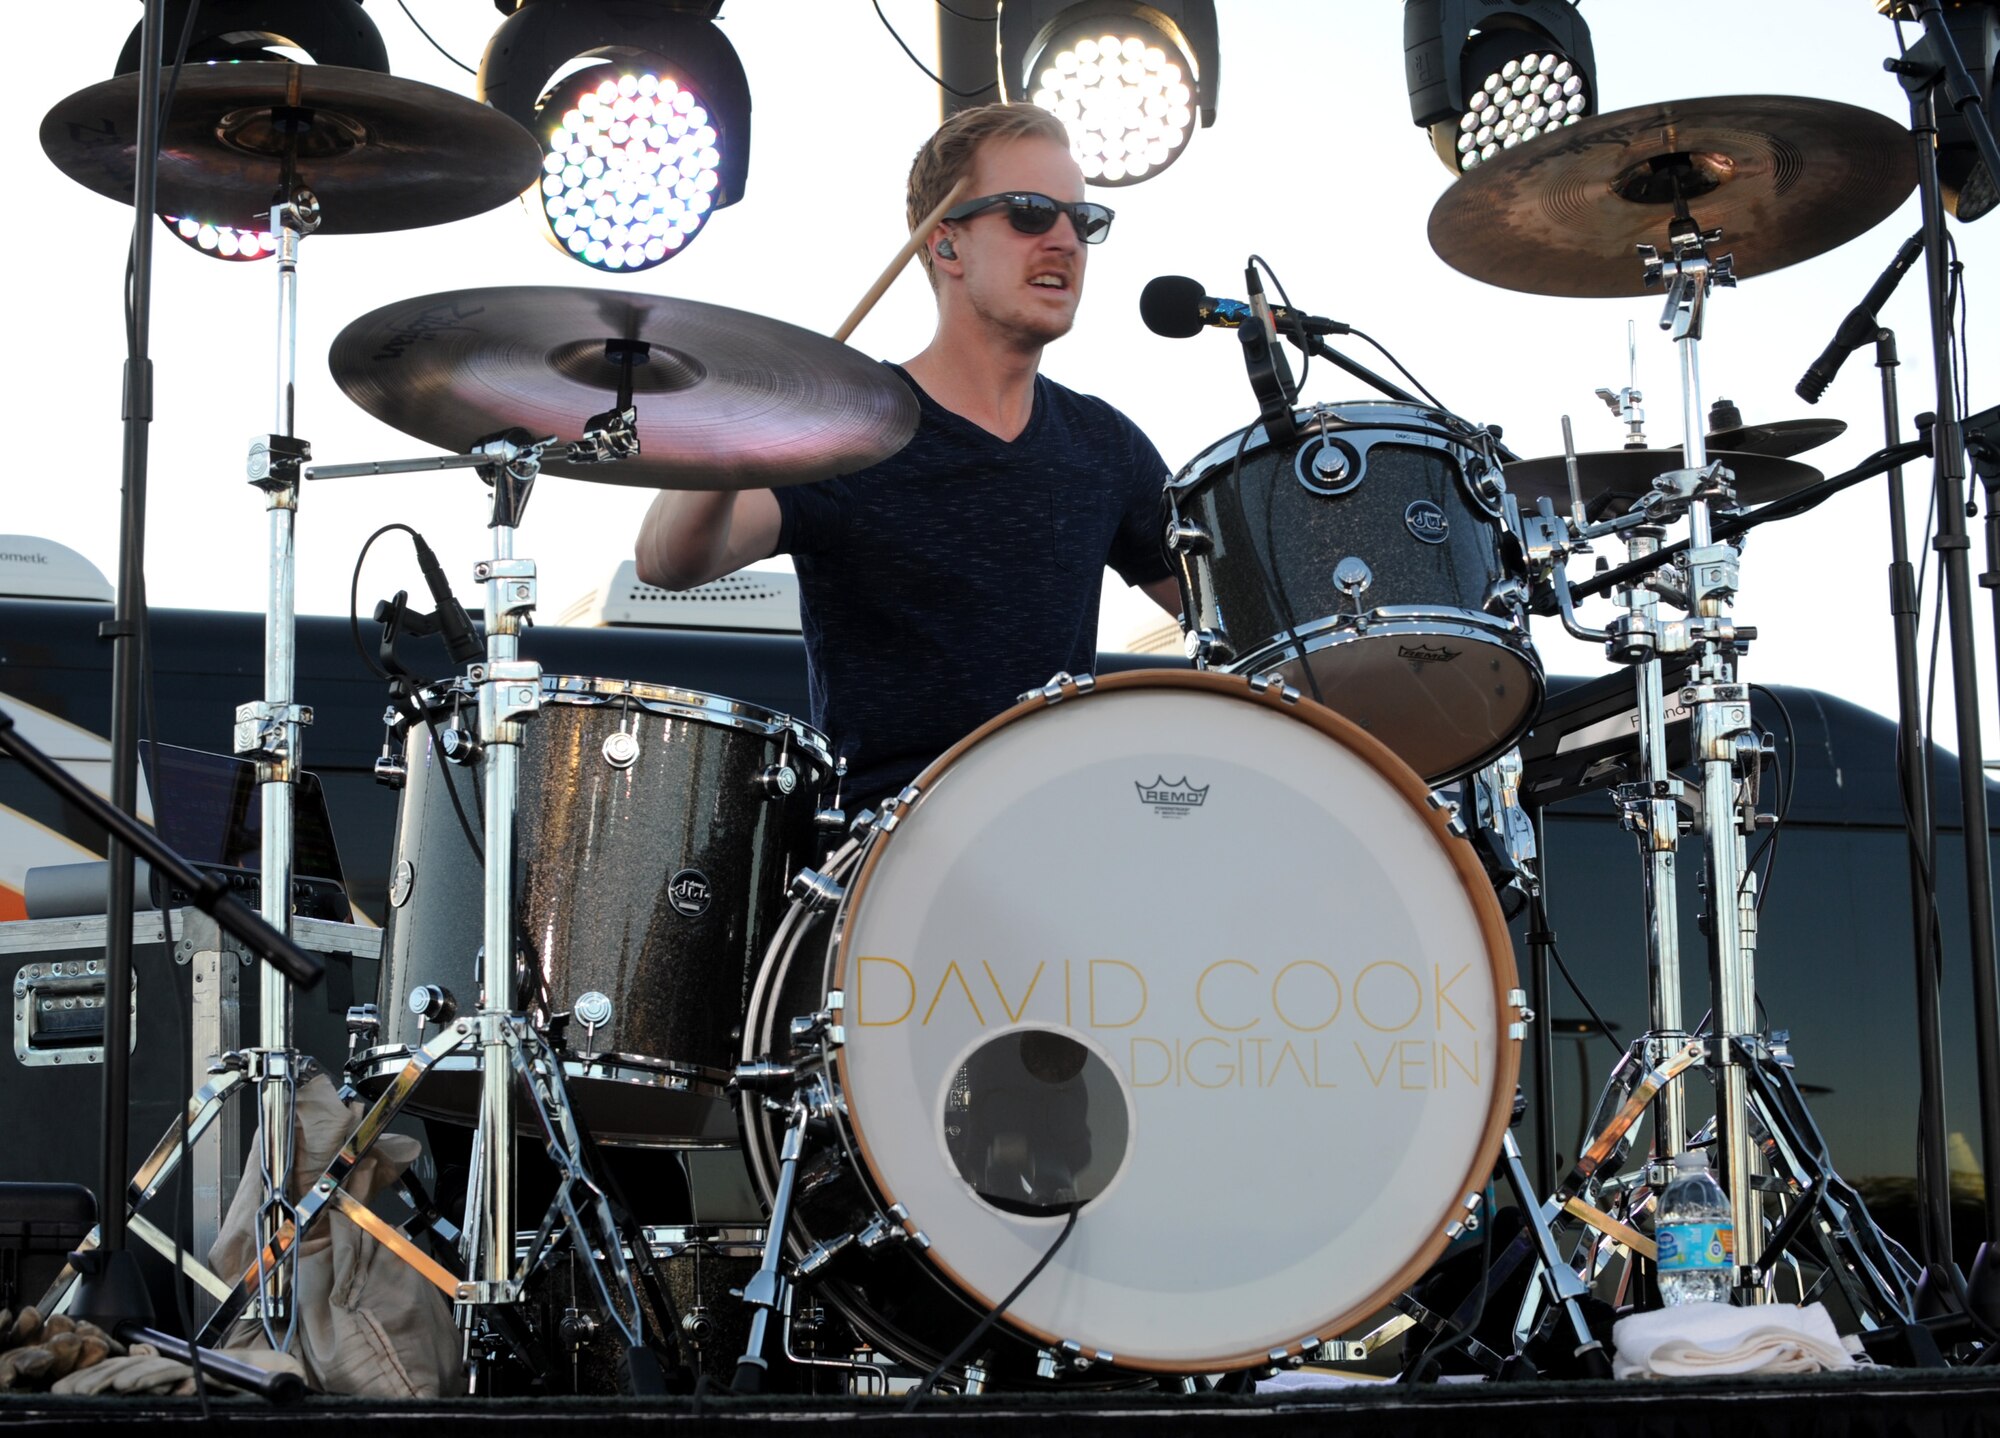 Nick Adams, drummer for David Cook, performs a solo during a free concert for Airmen and their families outside the Dakota’s Club at Ellsworth Air Force Base, S.D., June 3, 2016. As part of the Air Force Services Activities entertainment program, Cook and his band will be performing at 16 U.S. Air Force installations this year. (U.S. Air Force photo by Airman 1st Class Denise M. Nevins/Released)